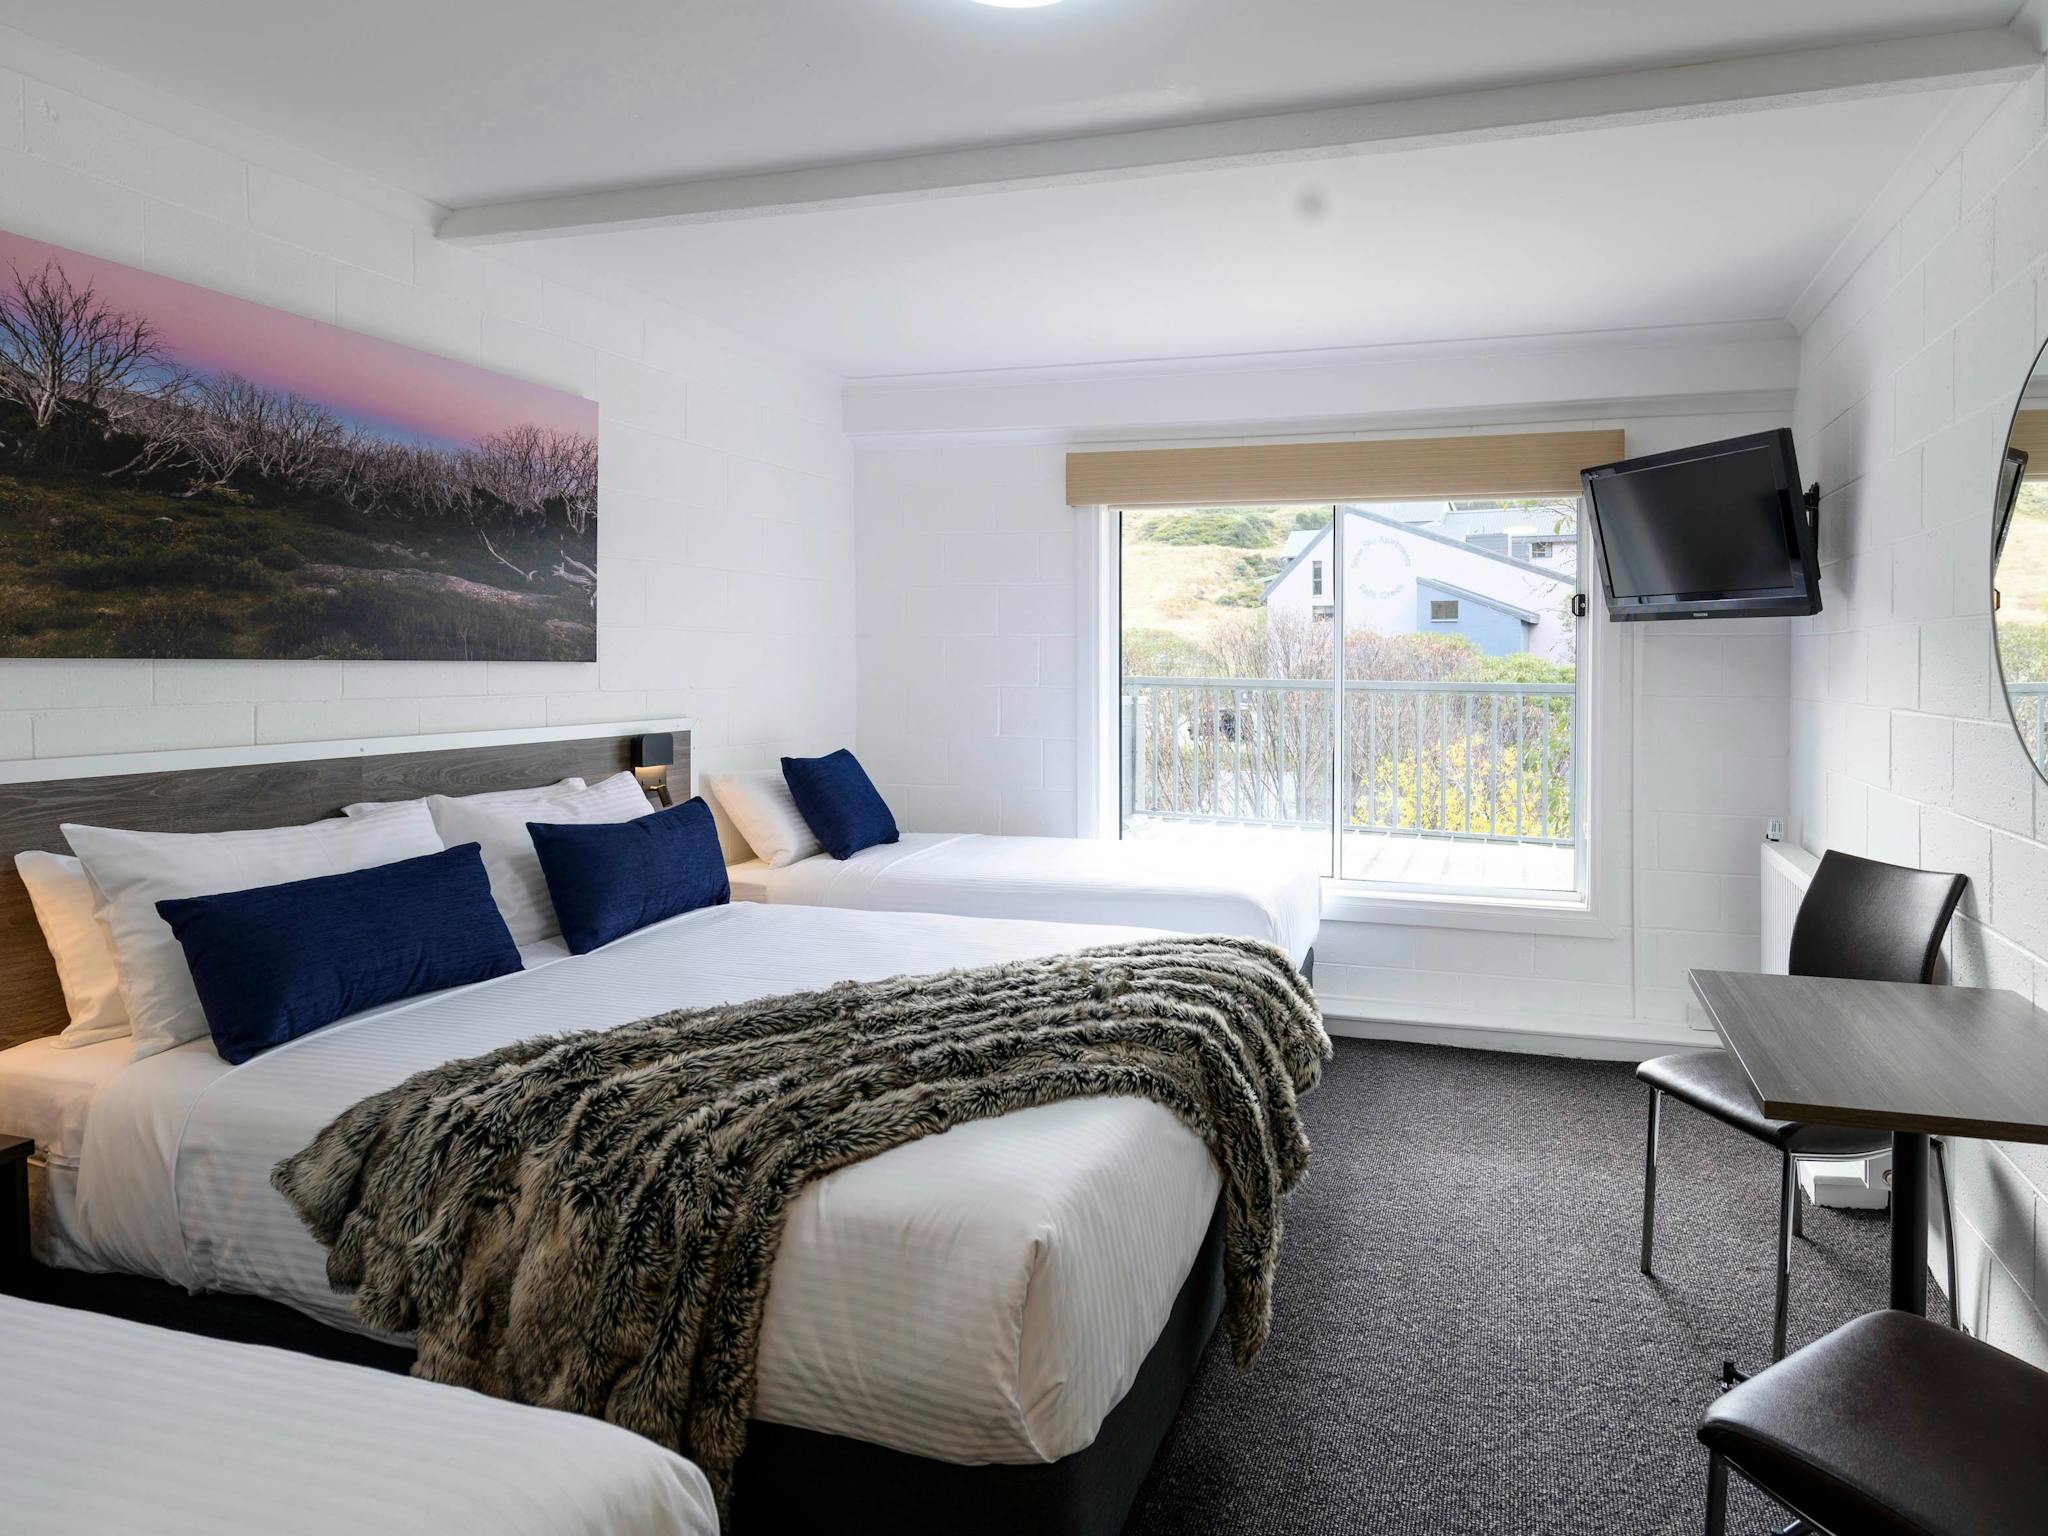 Room at Falls Creek Hotel showing bed and view from window